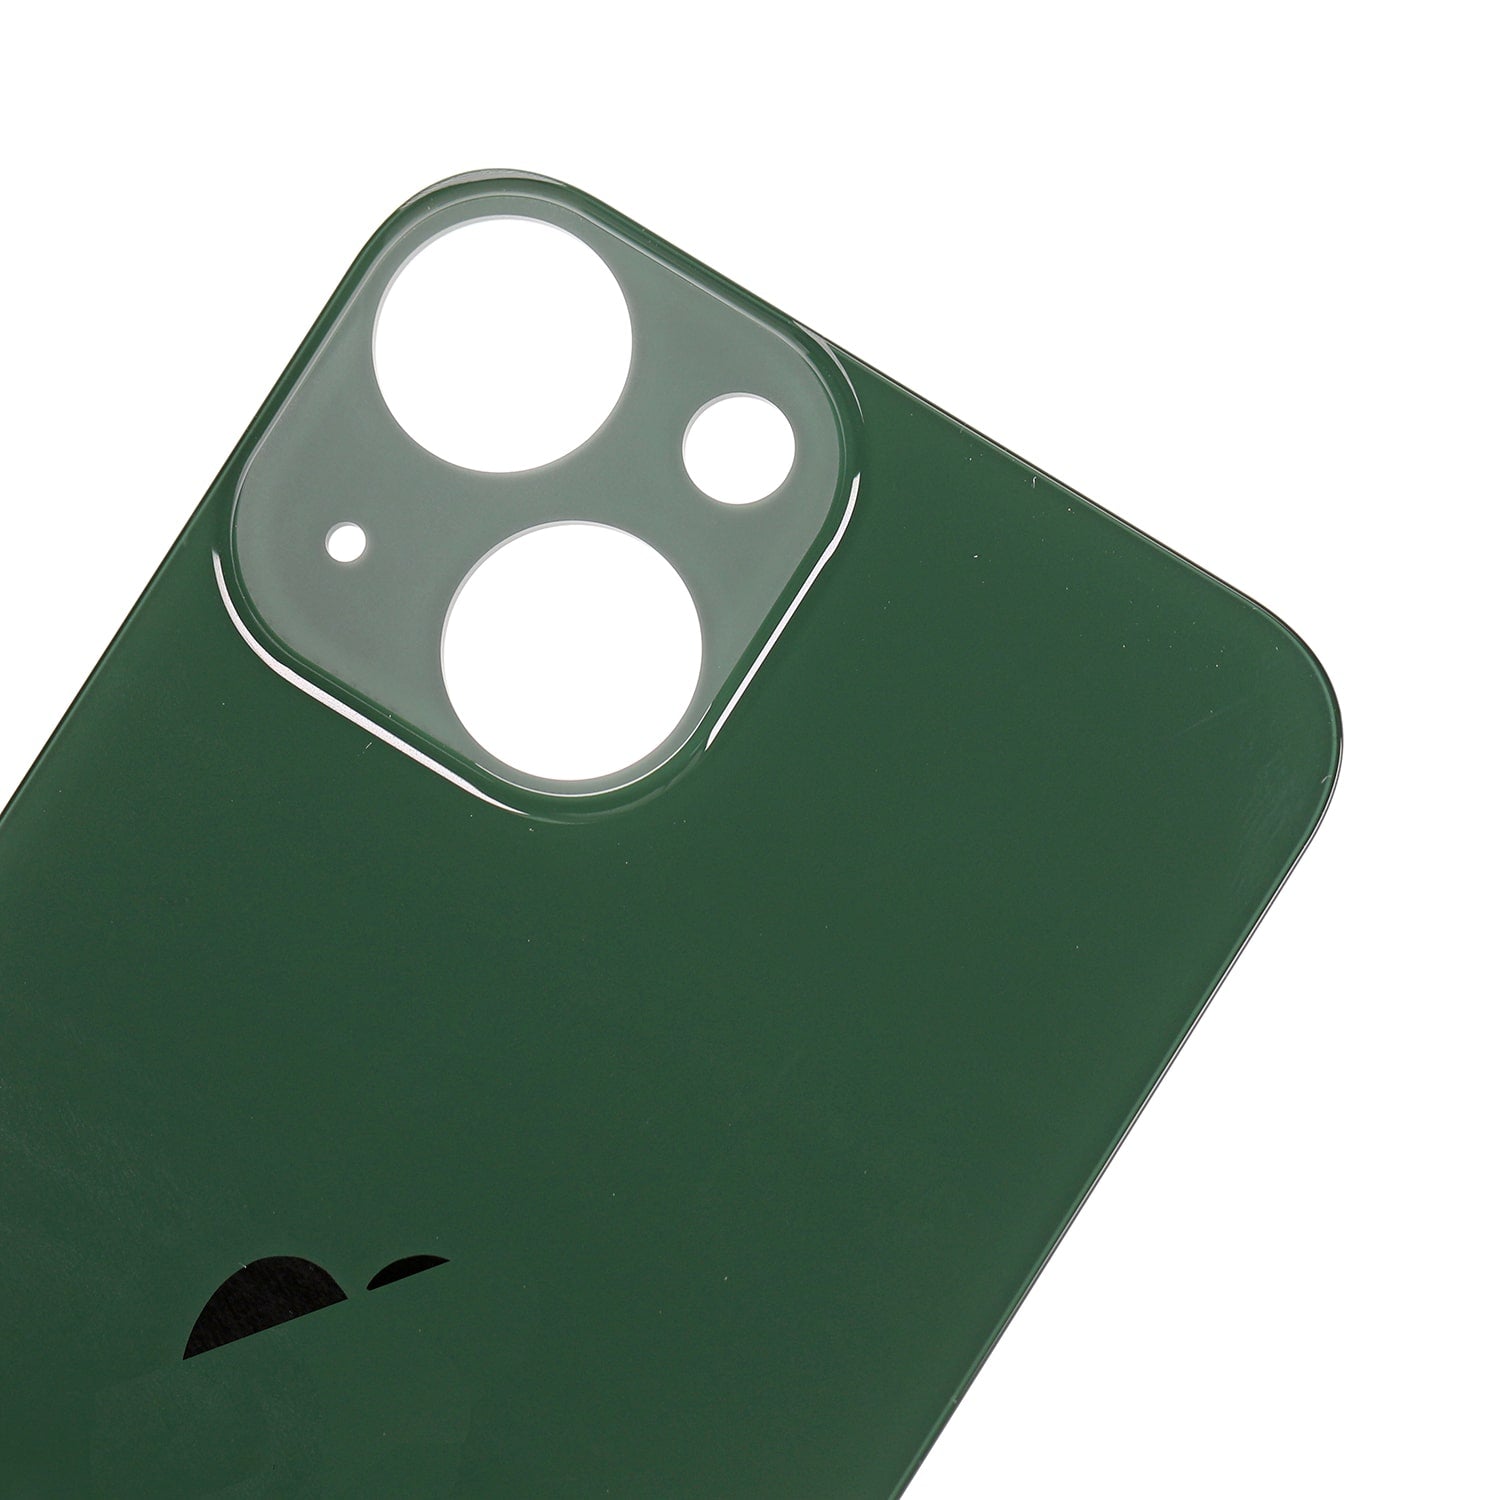 ALPINE GREEN BACK COVER GLASS FOR IPHONE 13 MINI